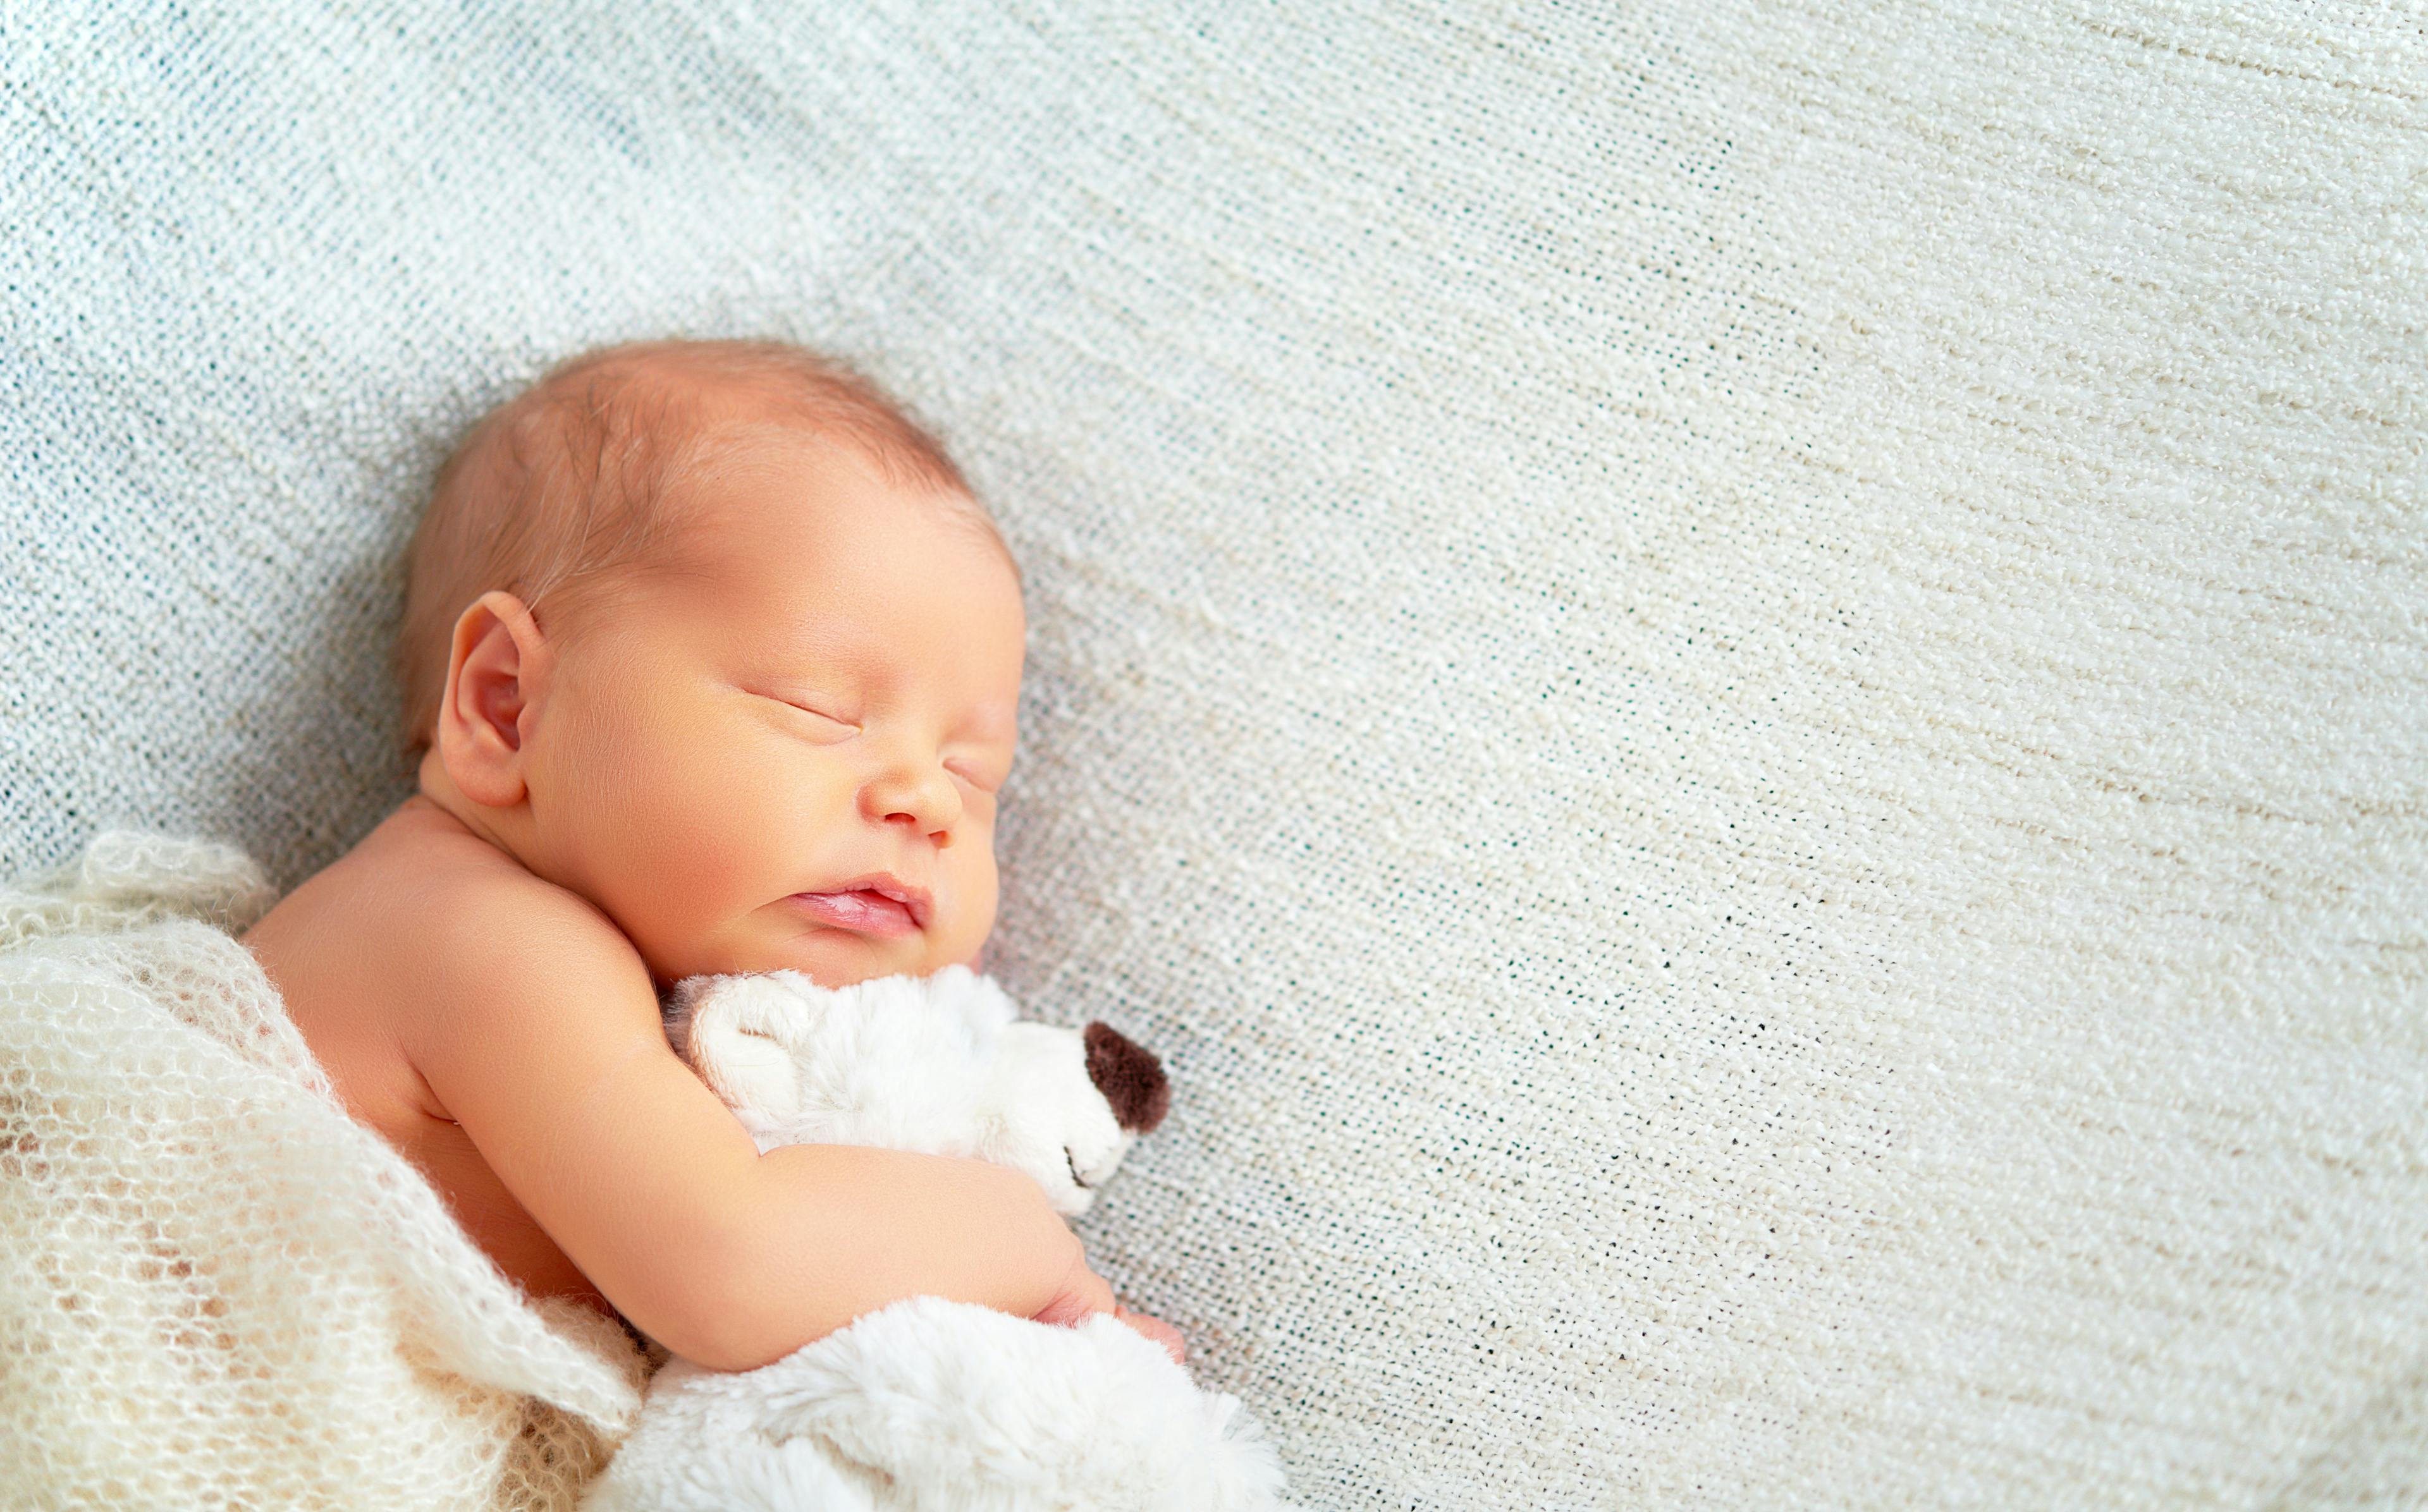 First Candle launches program to promote safe sleep in infants